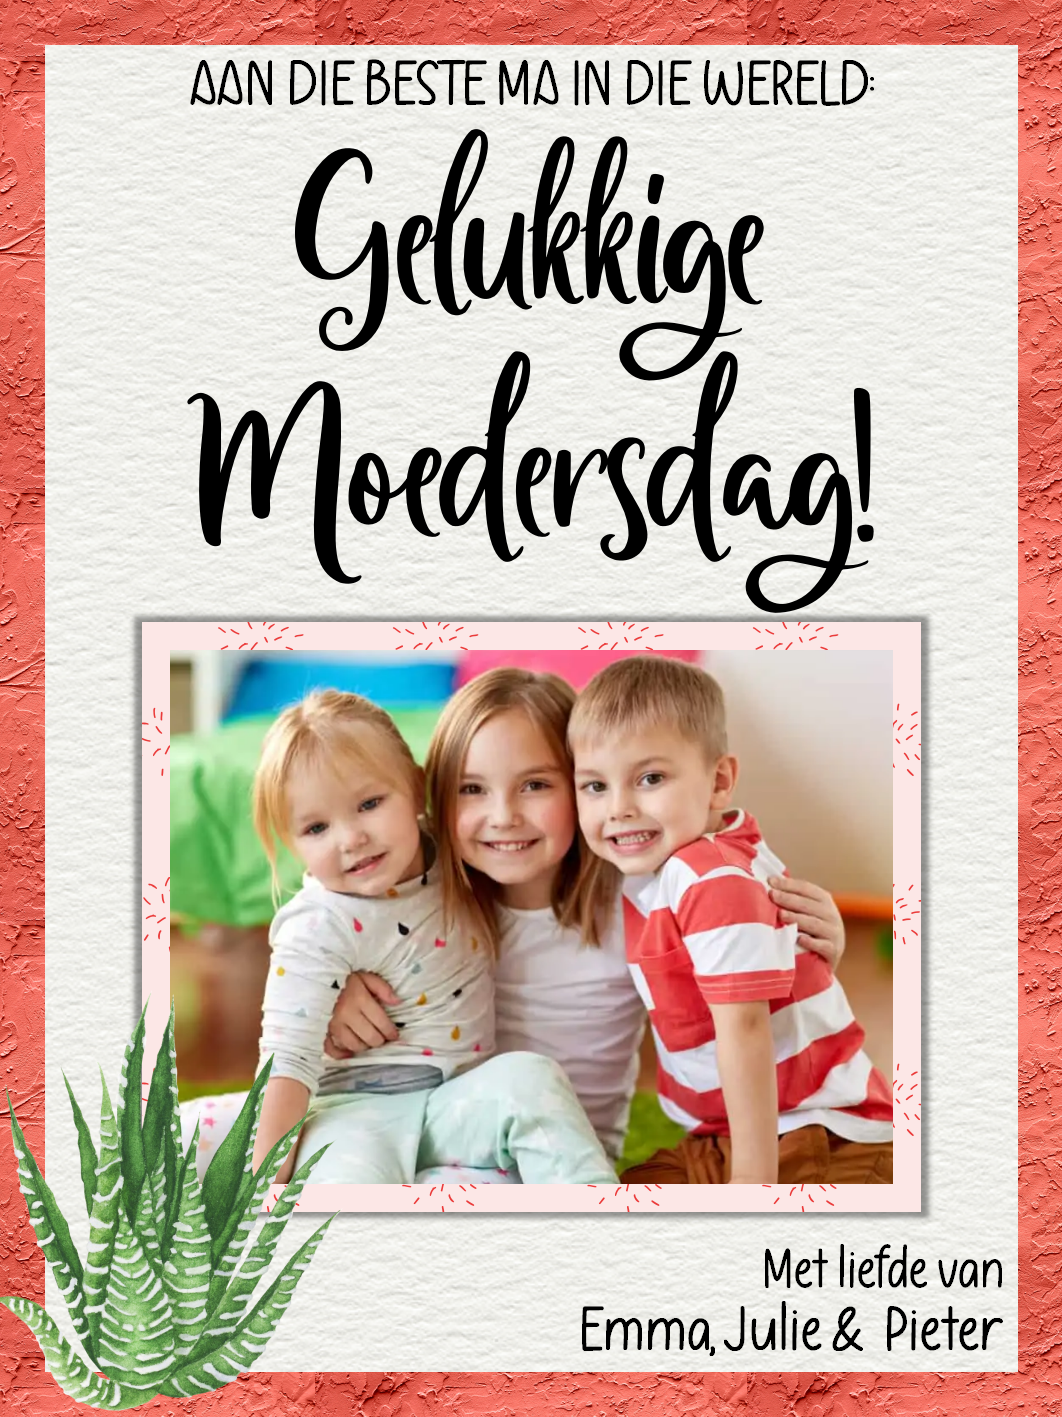 DIGITAL CARD: Mother's Day Wishes (Afrikaans)